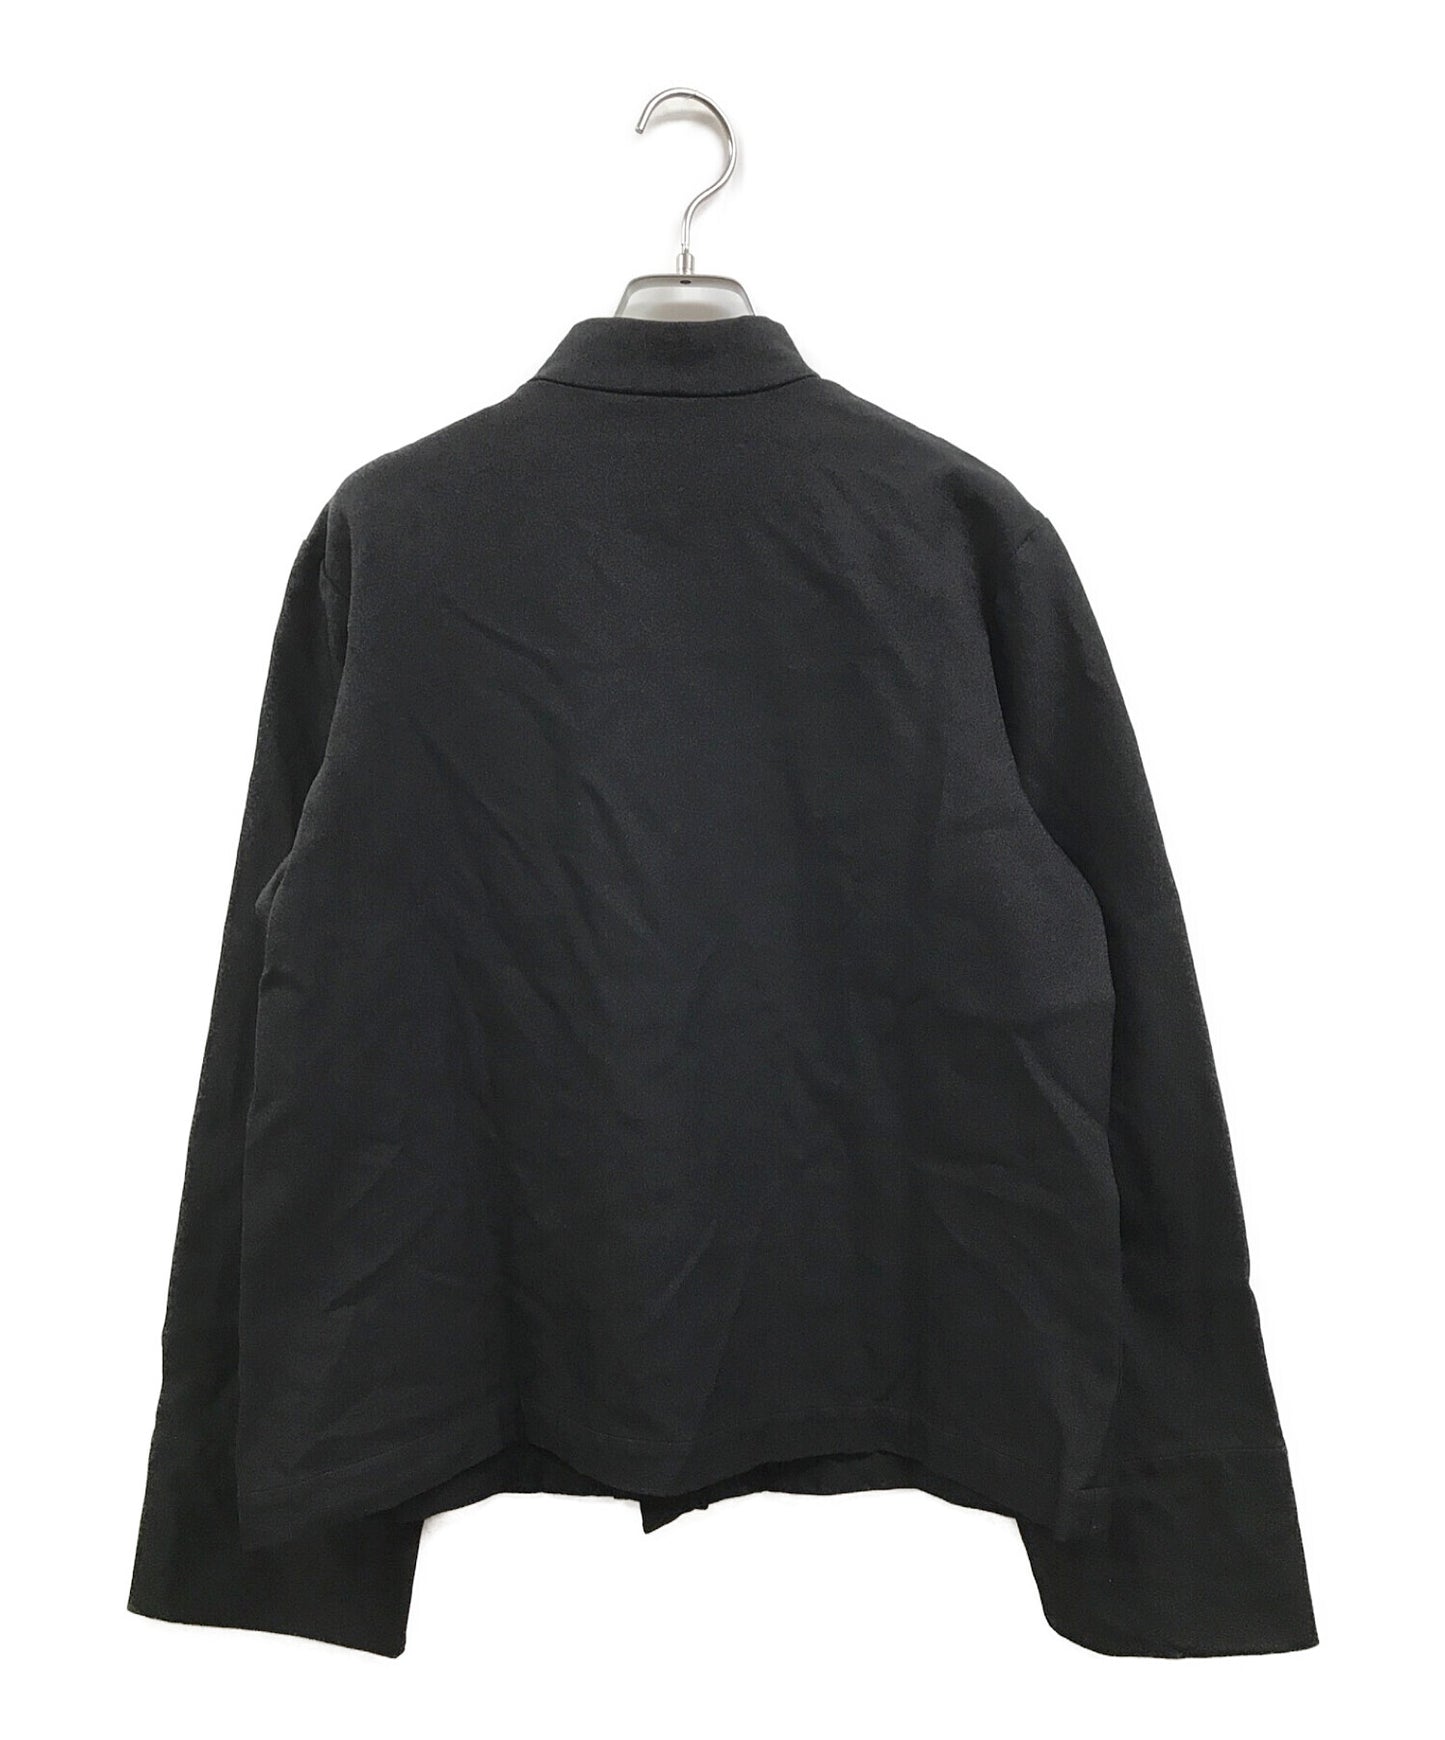 [Pre-owned] BLACK COMME des GARCONS Product-dyed China Jacket 1H-J217